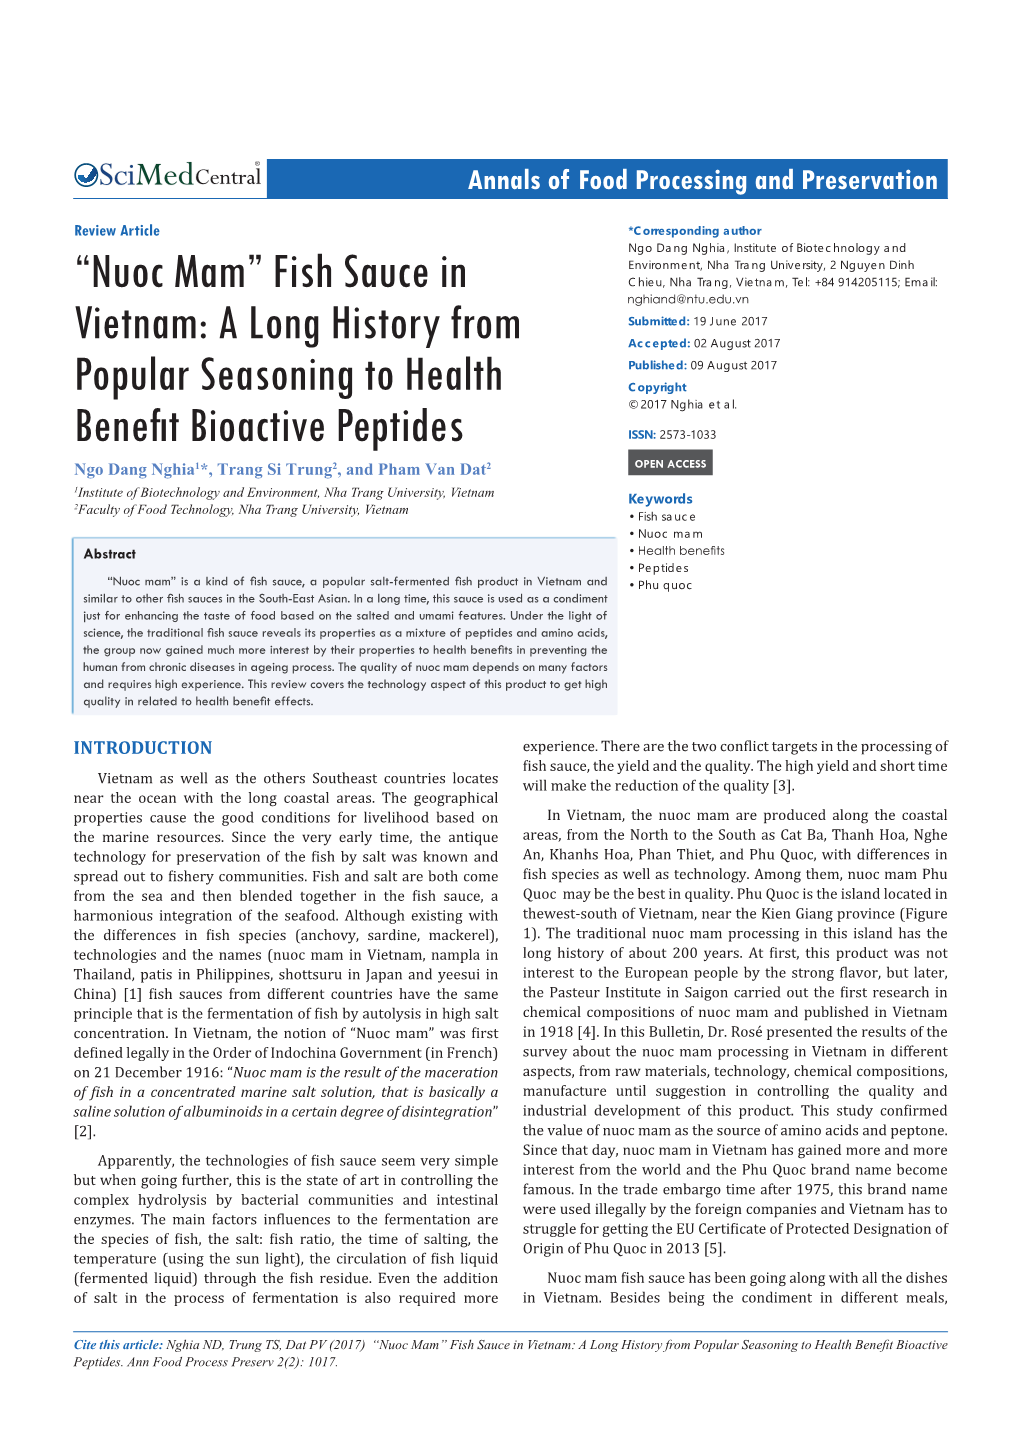 “Nuoc Mam” Fish Sauce in Vietnam: a Long History from Popular Seasoning to Health Benefit Bioactive Peptides